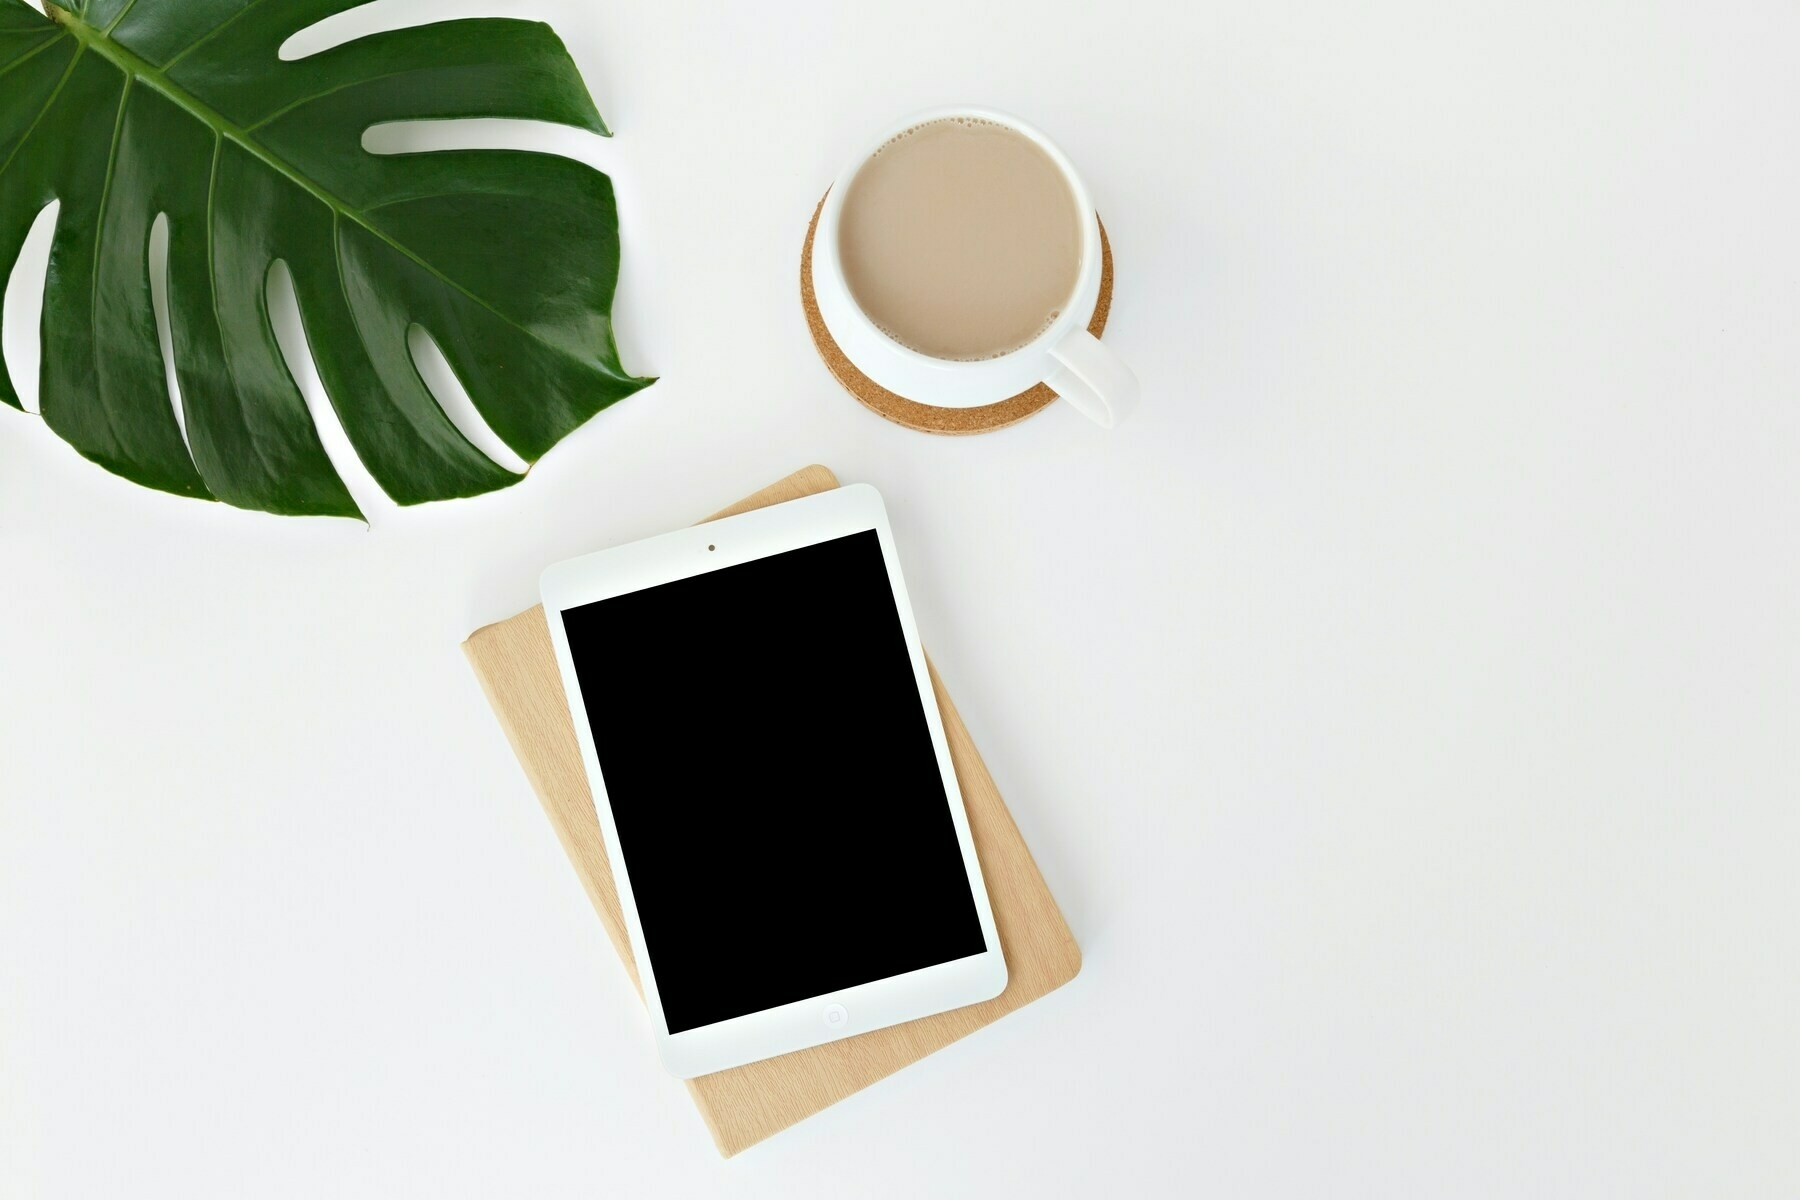 iPad, coffee, and leaf on a white surface